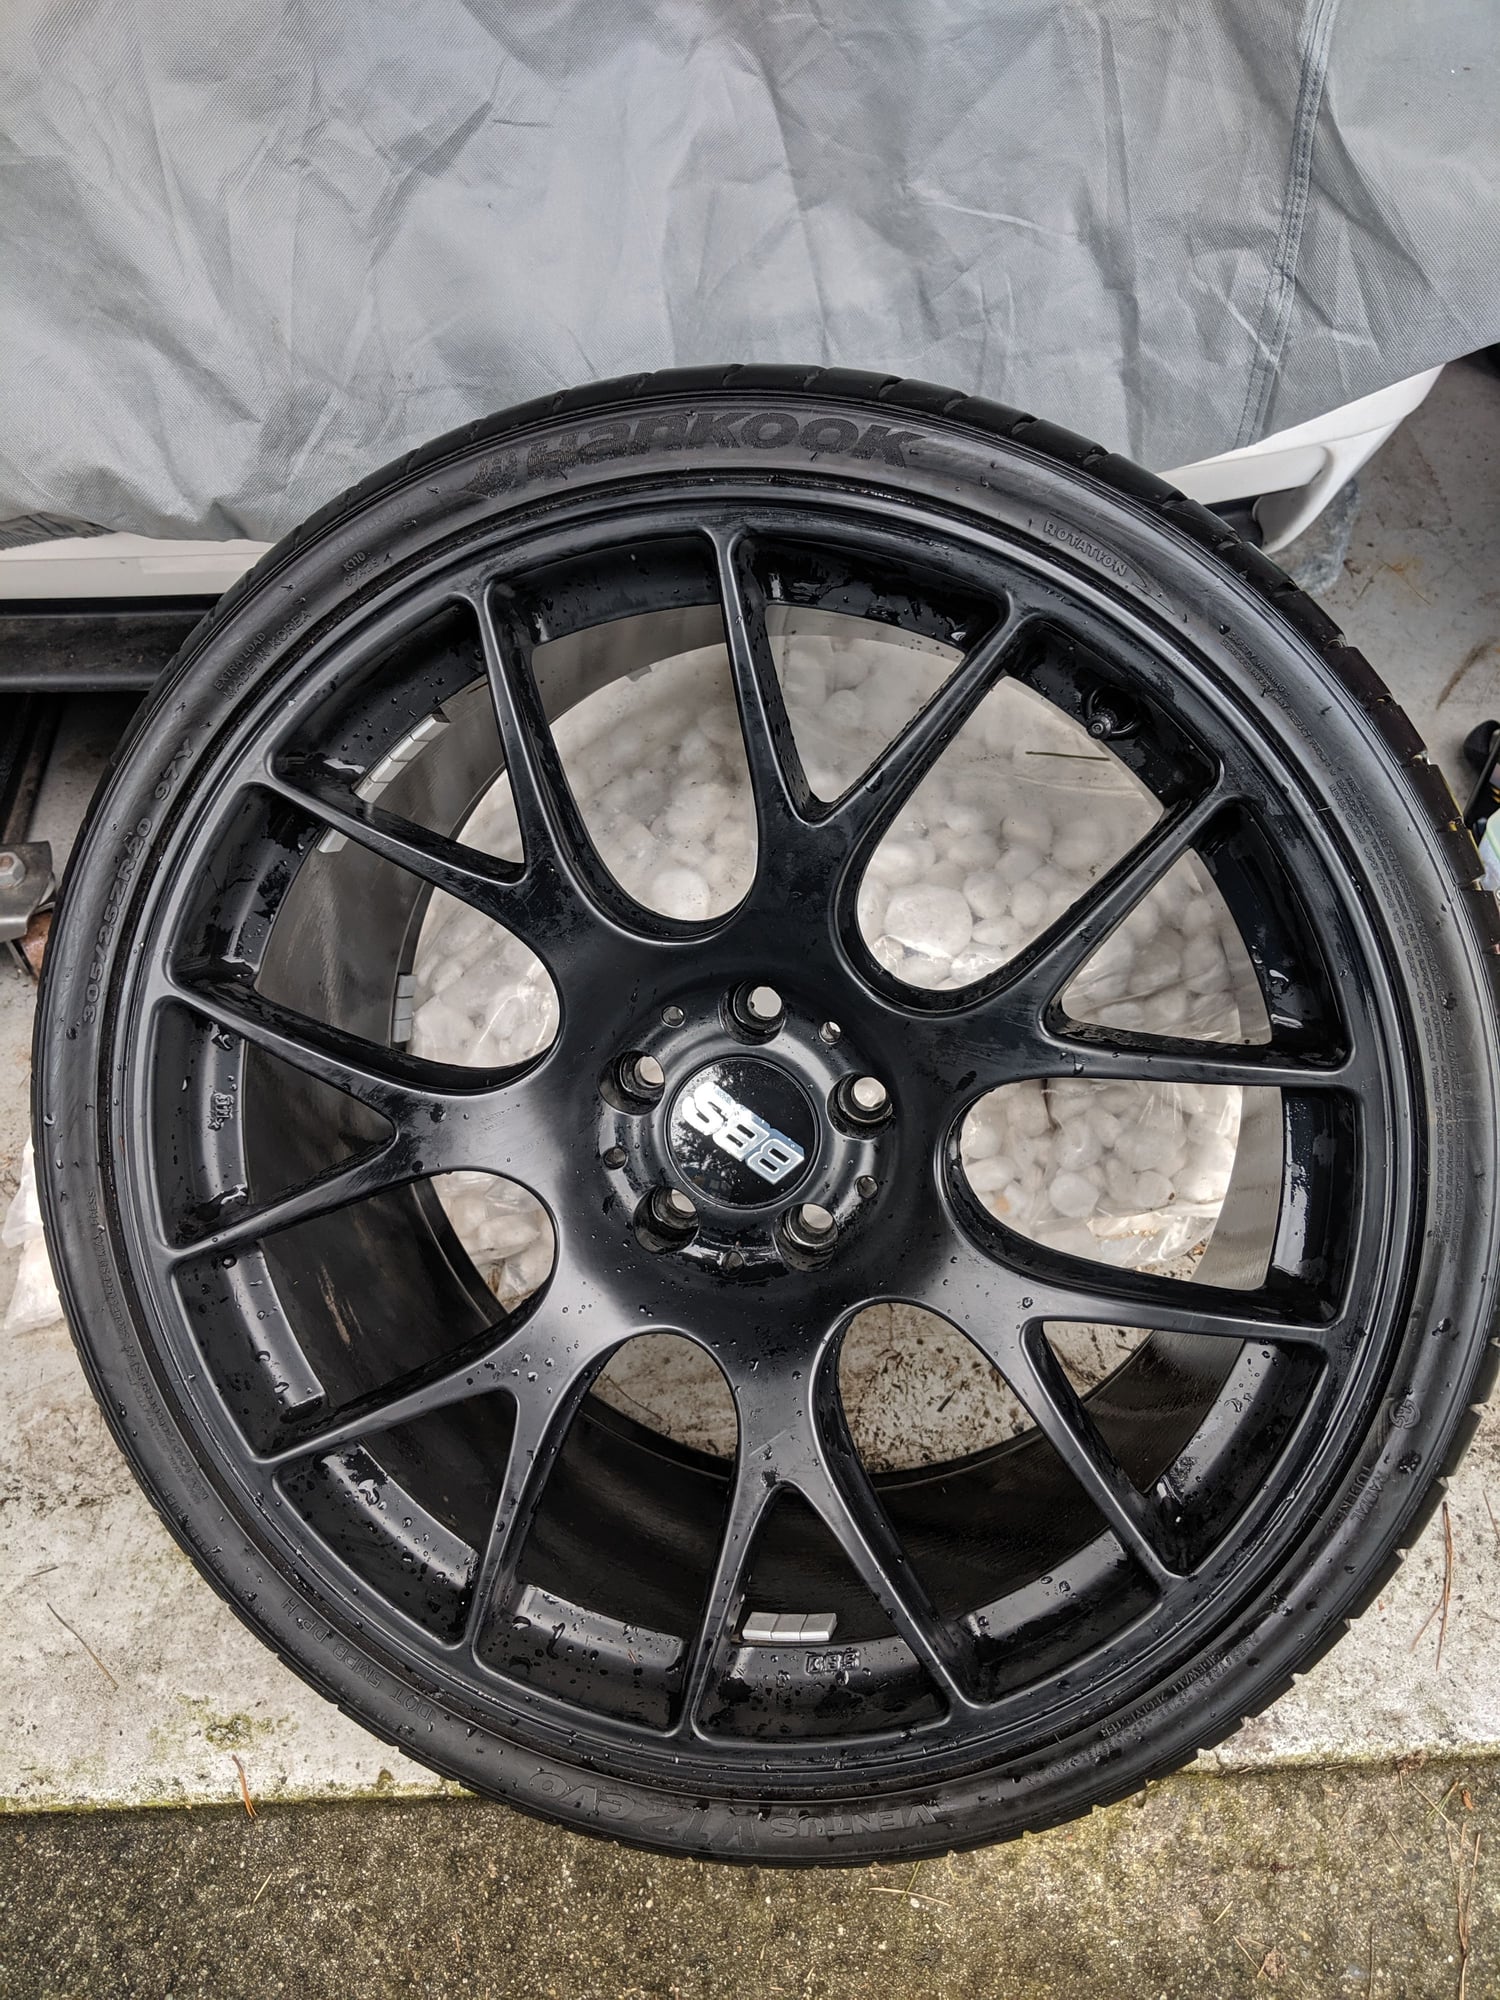 Wheels and Tires/Axles - 20" Black BBS CH R230 SL fitment wheels - SL55/SL65 (CLS) - Used - All Years Mercedes-Benz SL55 AMG - 2005 to 2011 Mercedes-Benz SL65 AMG - All Years Mercedes-Benz SL500 - All Years Mercedes-Benz SL600 - 2009 to 2011 Mercedes-Benz SL63 AMG - San Francisco, CA 94116, United States